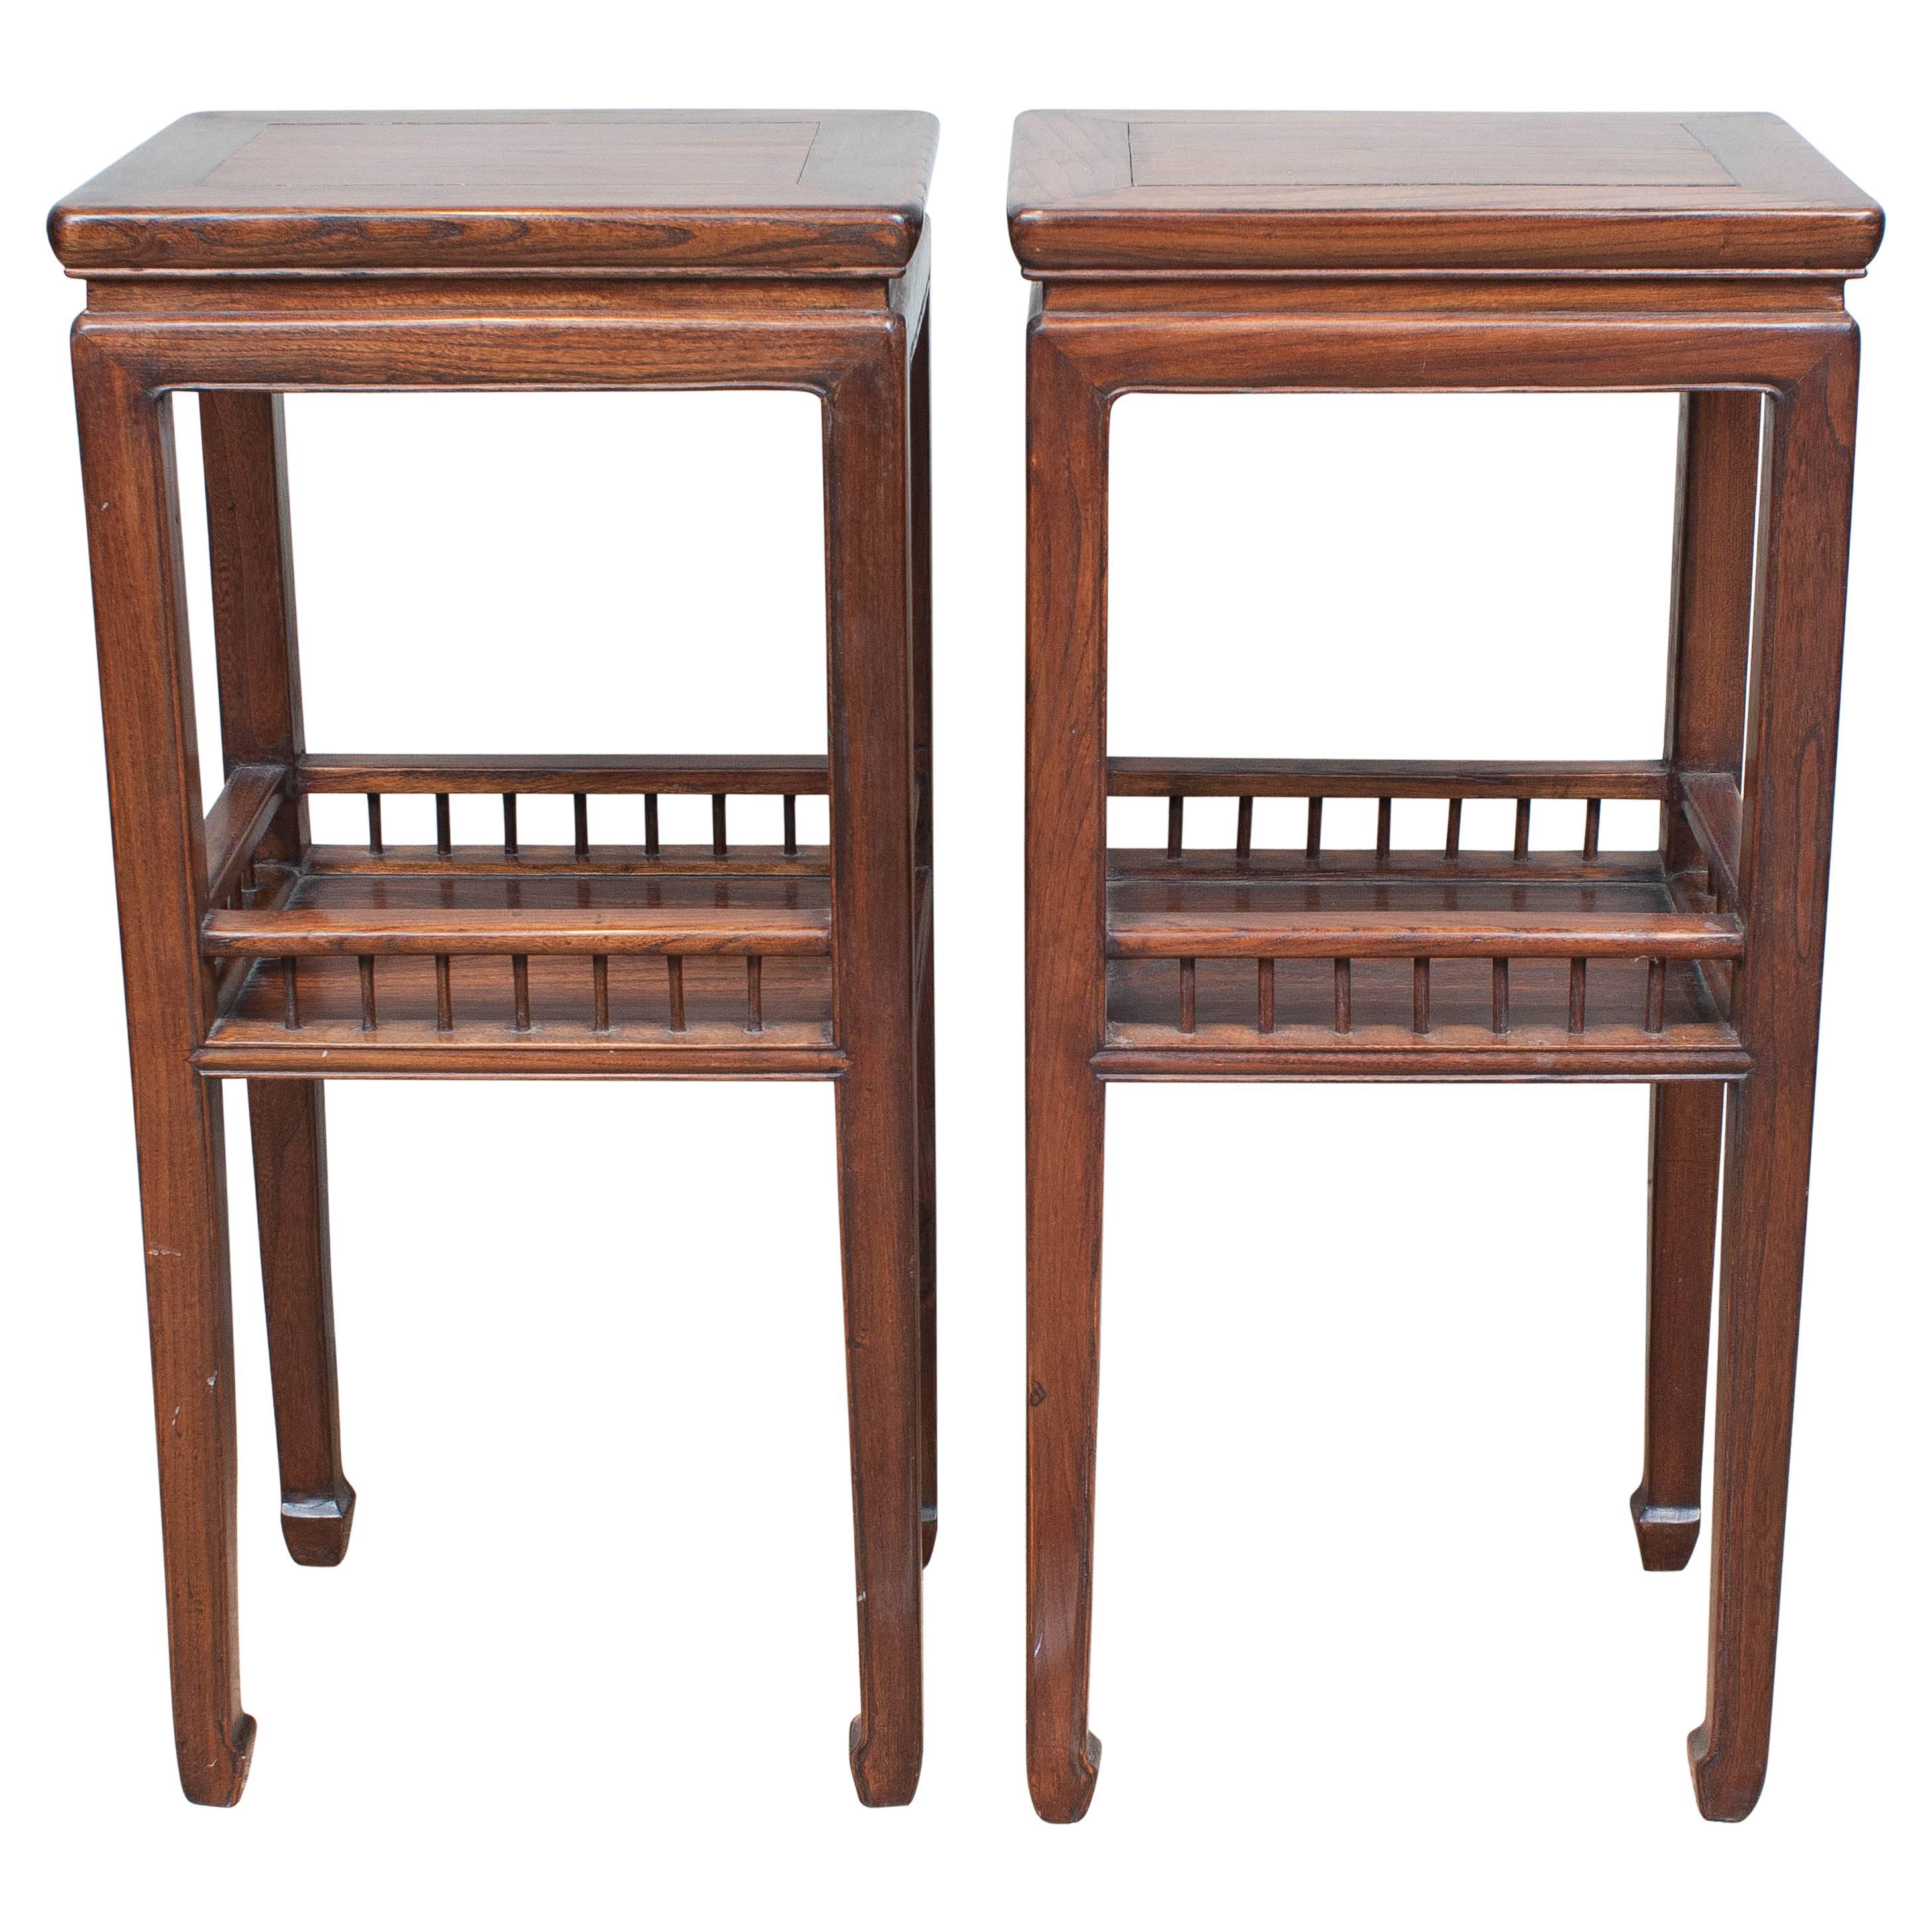 19th Century Pair of Qing Dynasty End Tables